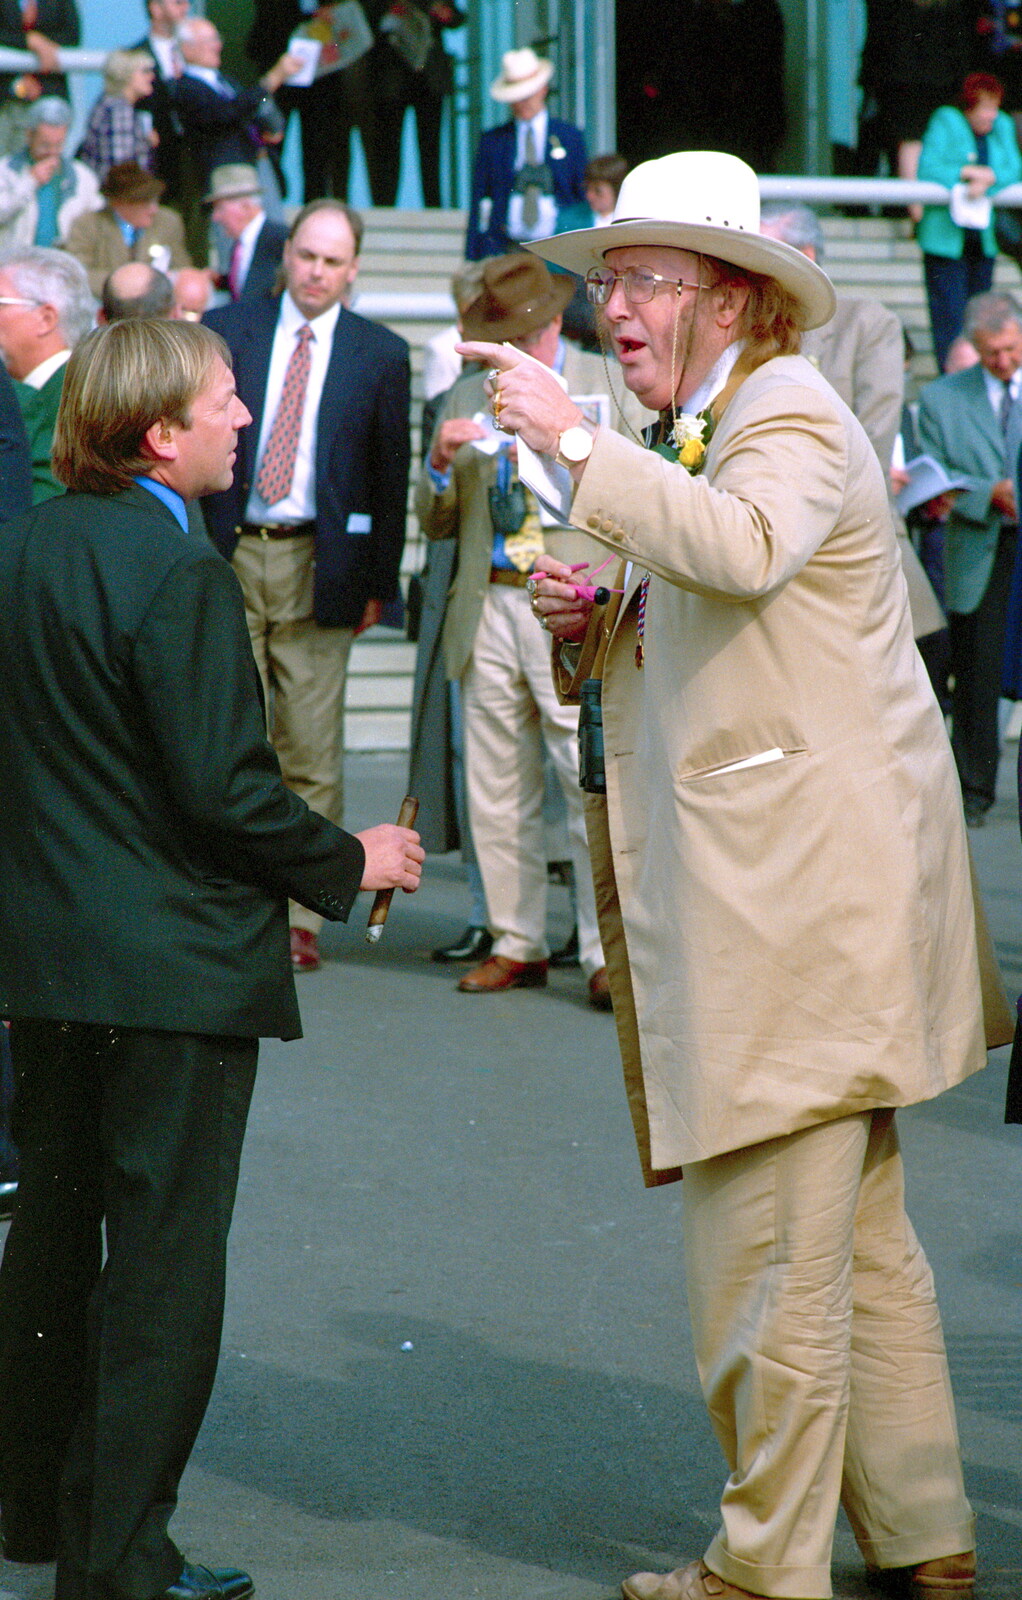 John McCrirrick in action from 3G Lab Goes to the Races, Newmarket, Suffolk - 15th July 2001